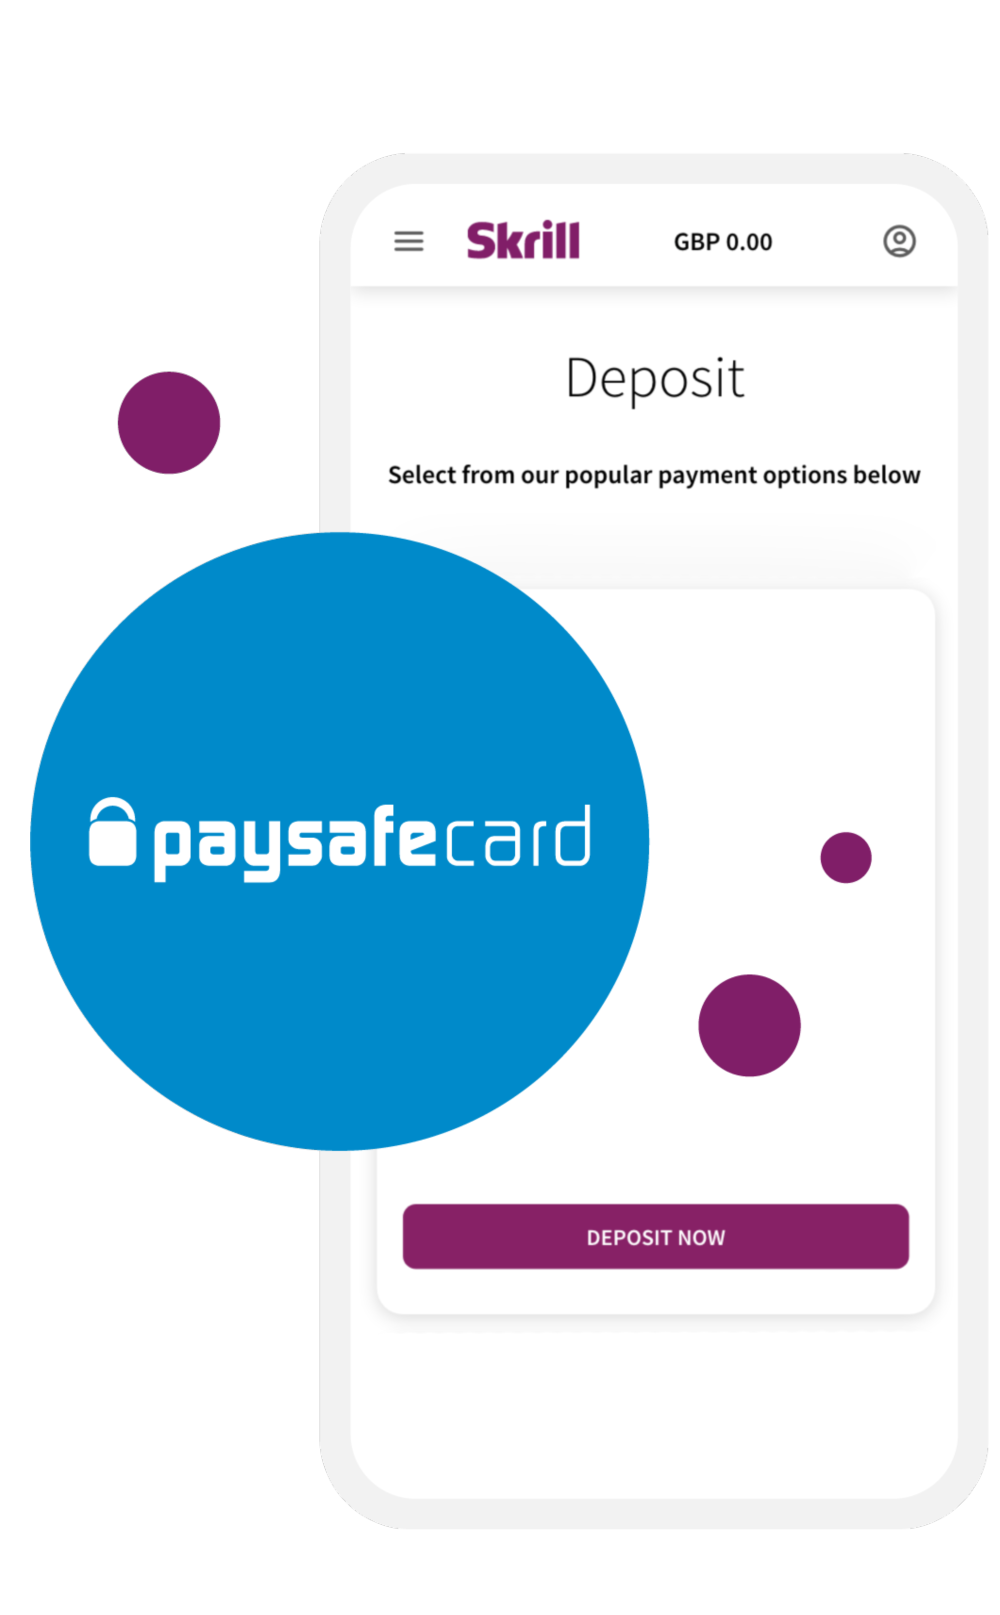 Skrill app screen showing you can deposit from paysafecard